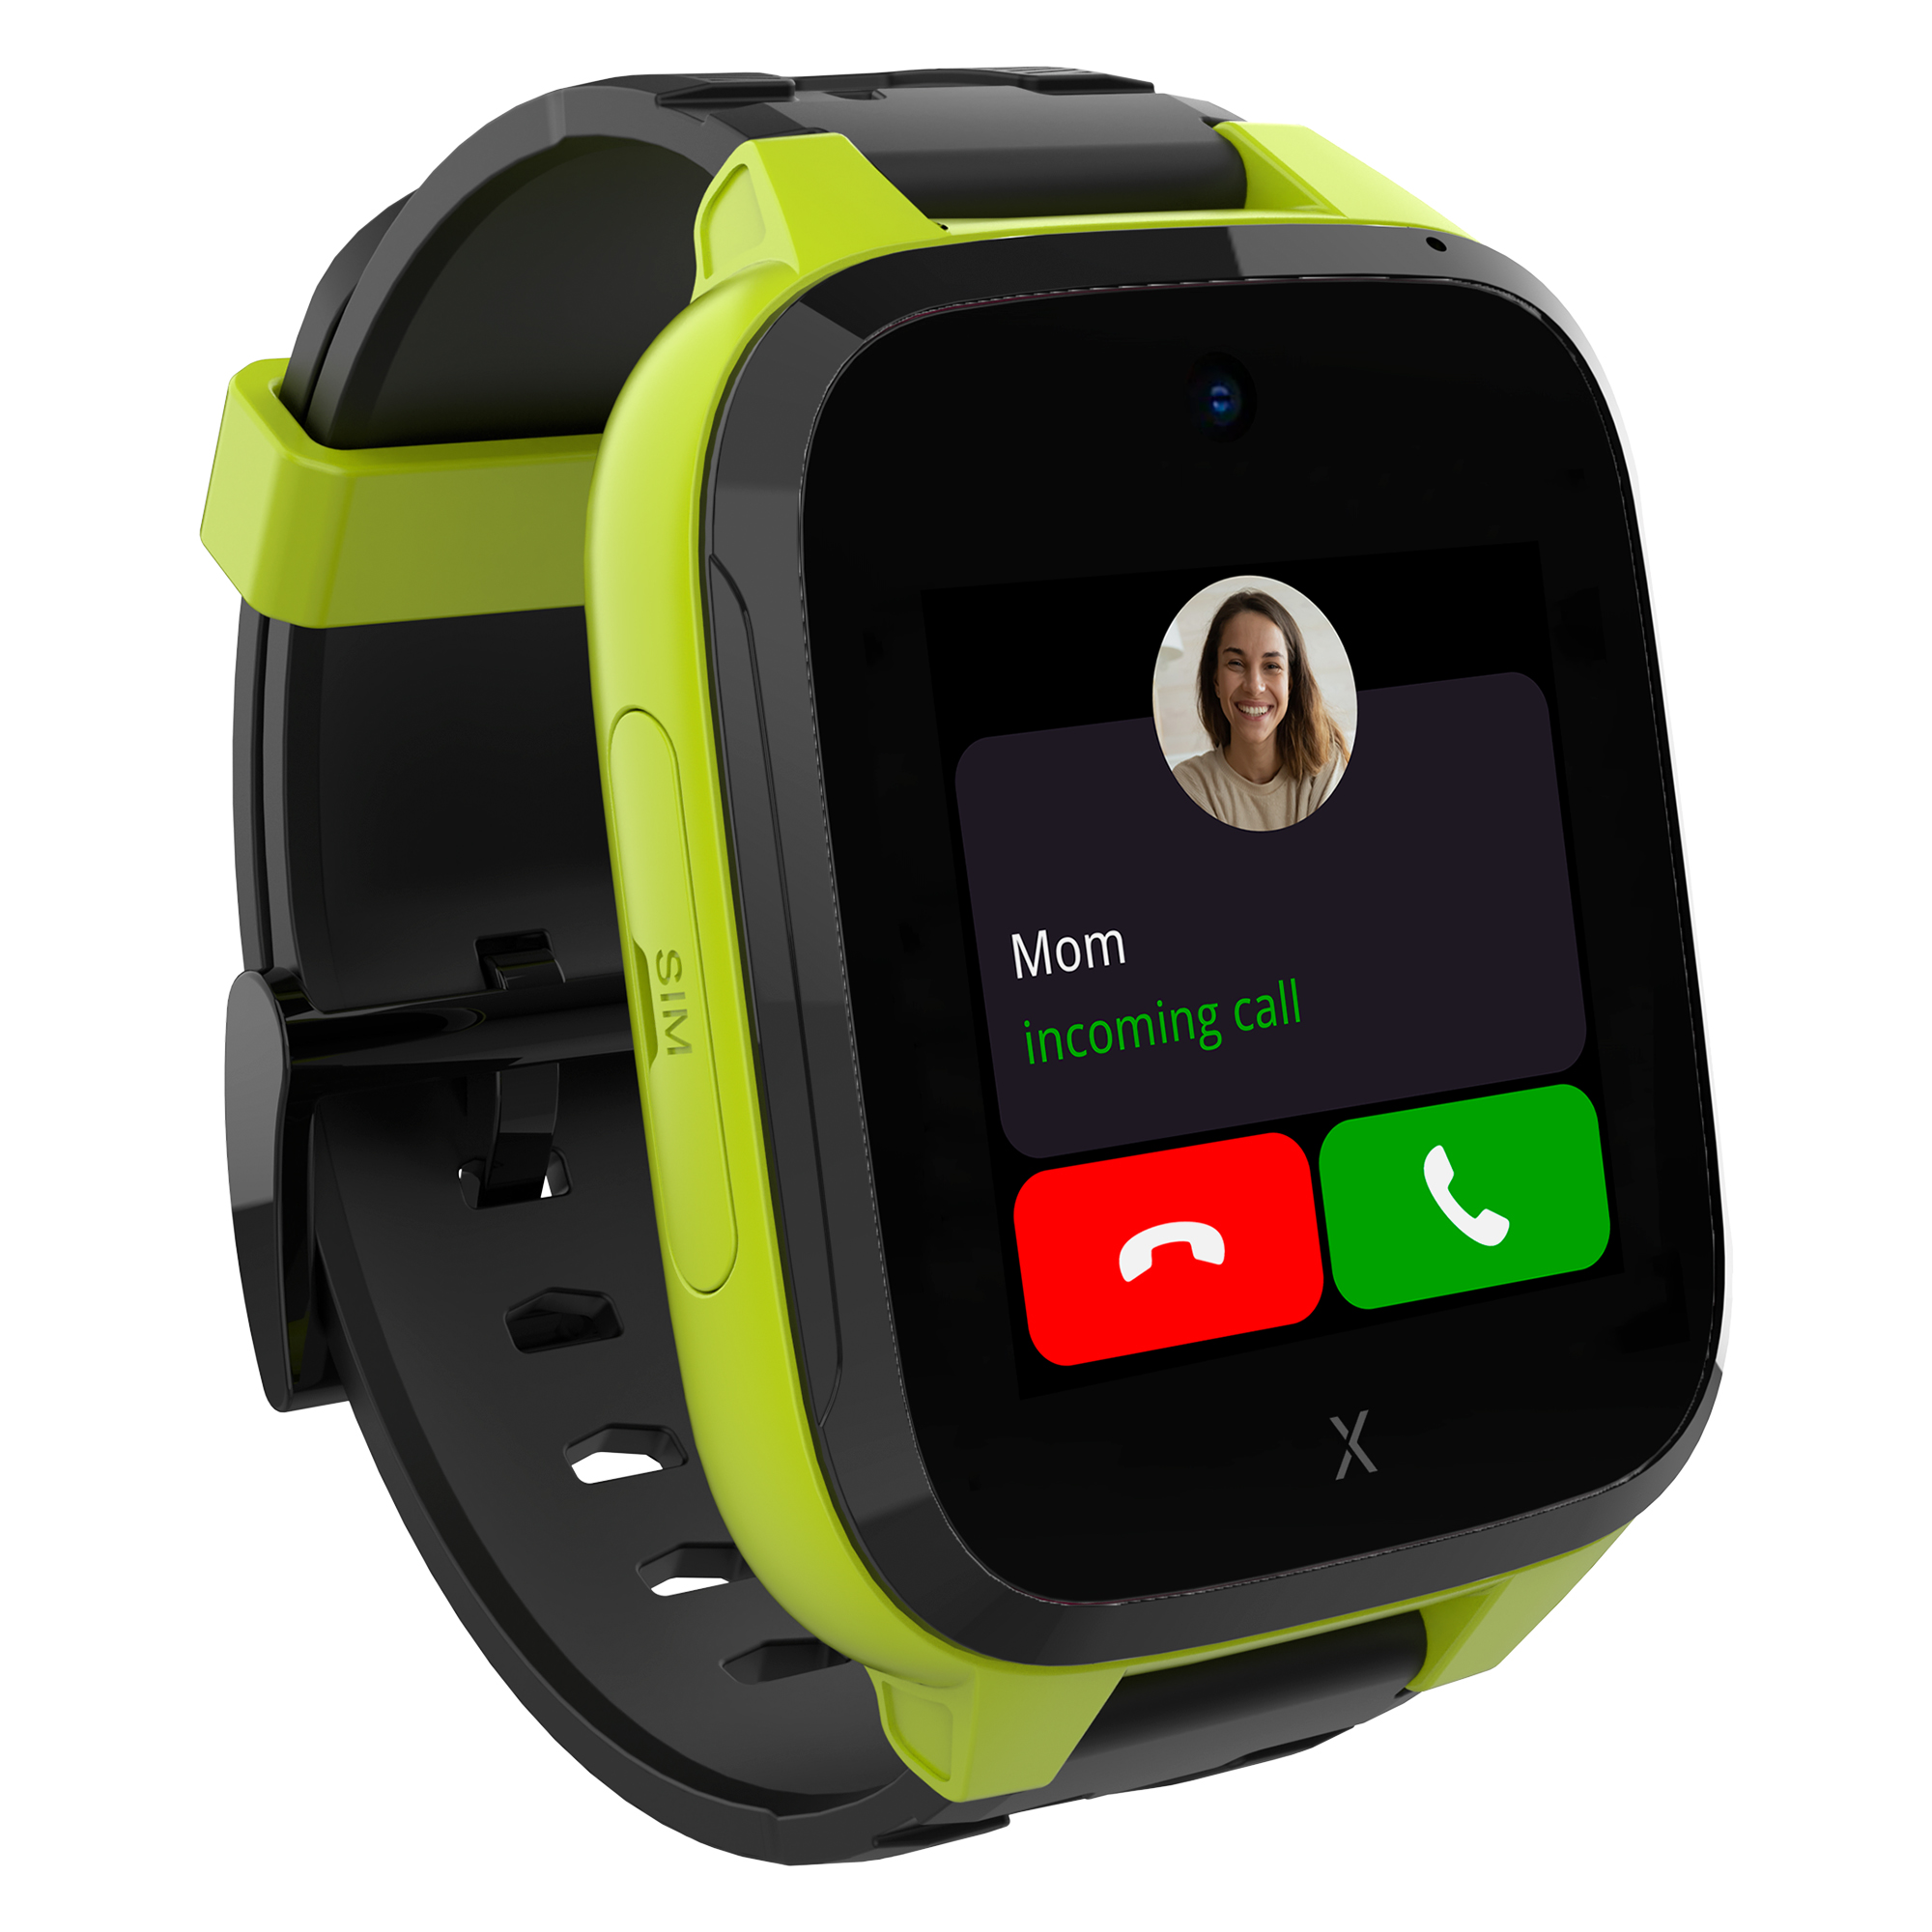 Angle View: Xplora - Kids' XGO3 (GPS + Cellular) Smartwatch 42mm Calls, Messages, SOS, GPS Tracker, Camera, Step Counter, SIM Card included - Green